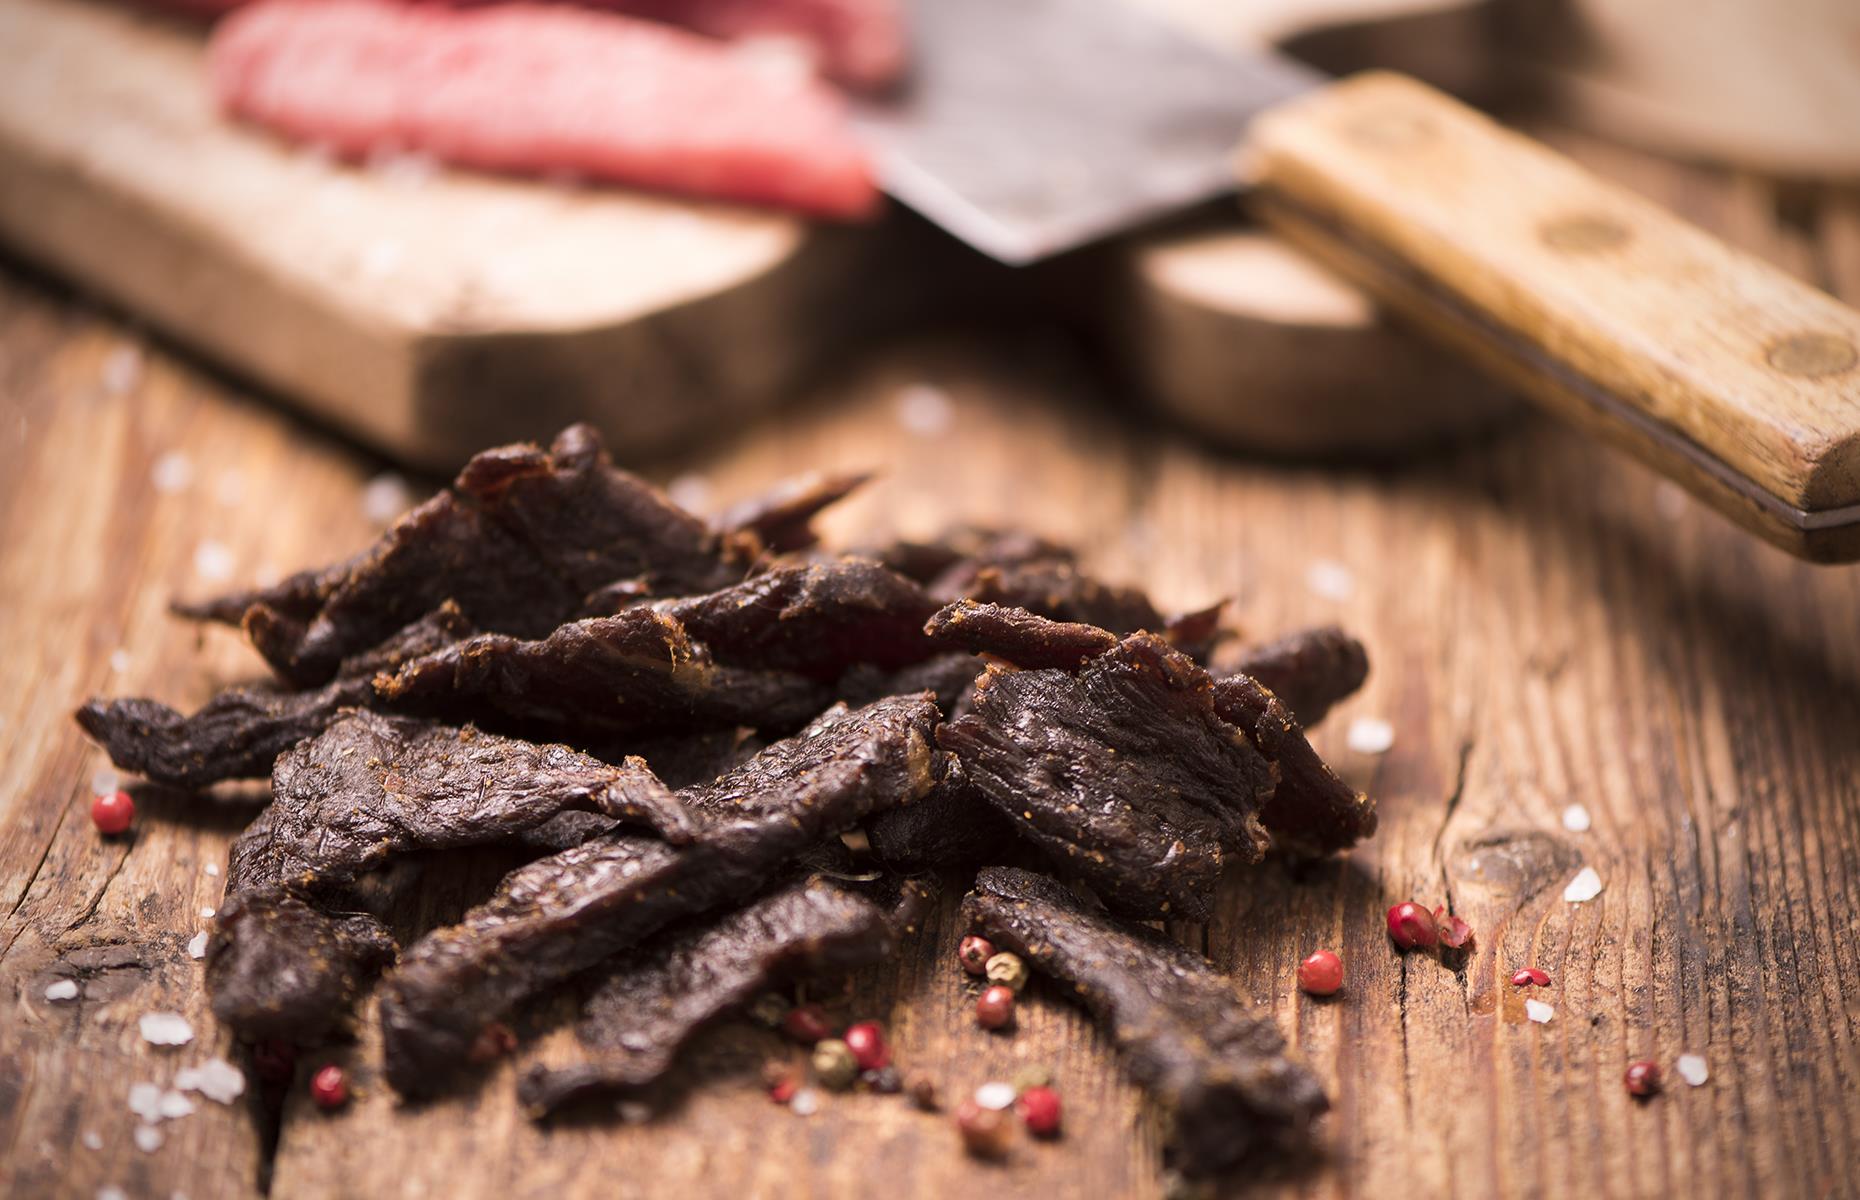 <p>Beef jerky may seem like a pretty modern snack, but its roots go back much further than you might think. A type of mummified beef jerky was <a href="https://cen.acs.org/articles/91/i47/Mummified-Beef-Jerky-Found-Pyramids.html">found in ancient Egyptian pyramids</a> in recent decades and, before that, its origins were pinned to the Incas. It's thought that the word "jerky" comes from the Quechuan (a language spoken in the Andes) word “ch’arki”, which means "dried meat".</p>